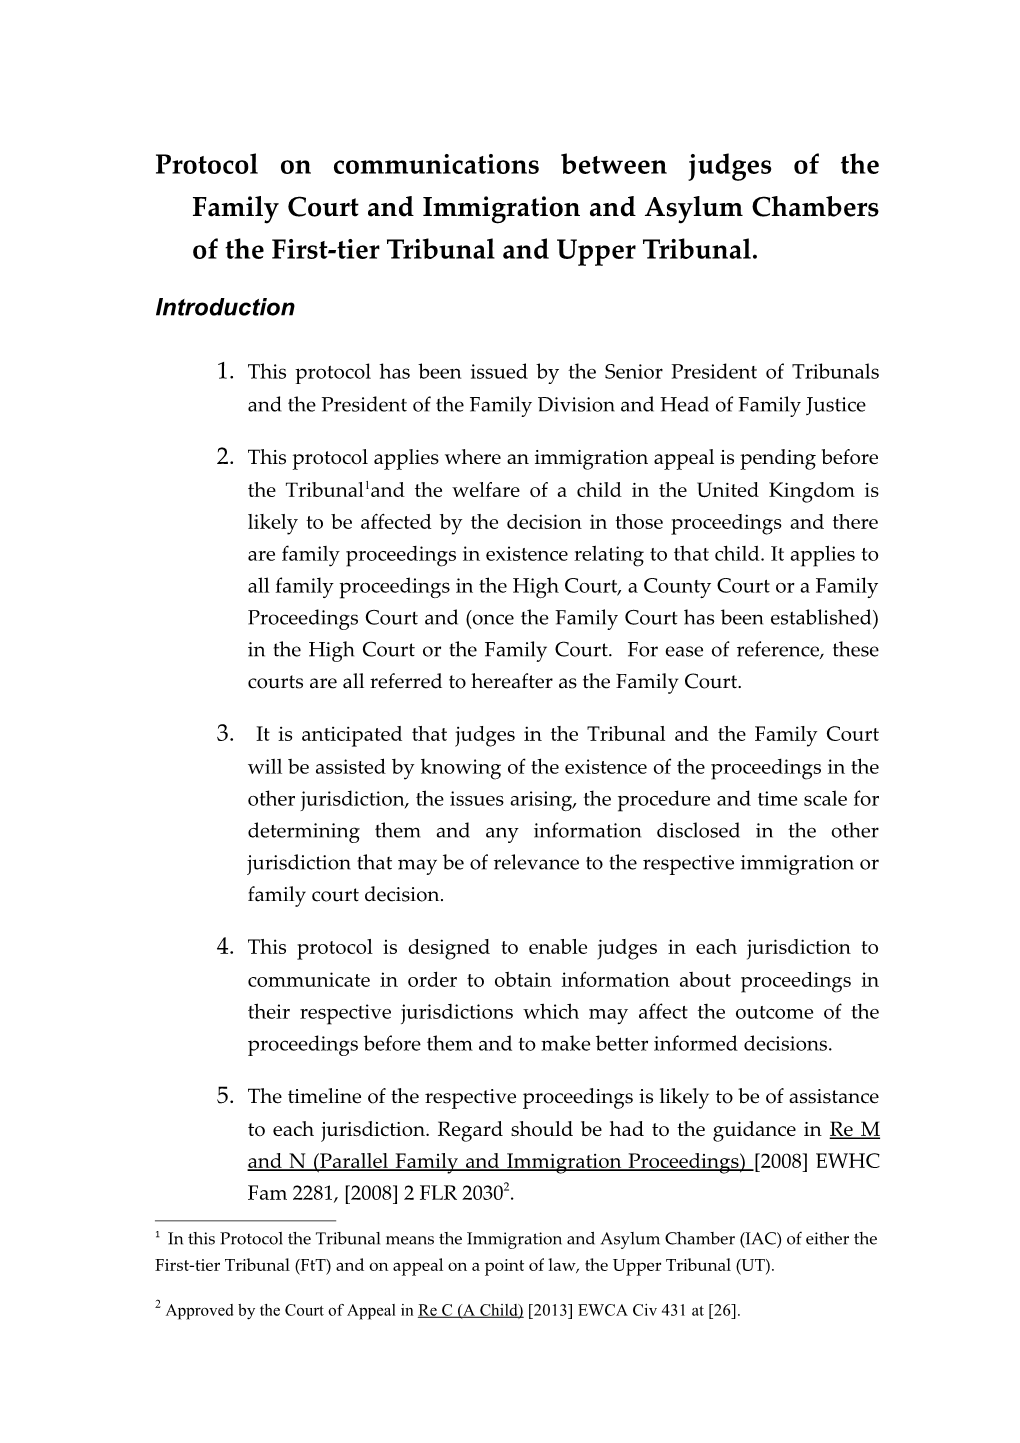 Protocol on Communications Between Judges of the Family Court and Immigration and Asylum